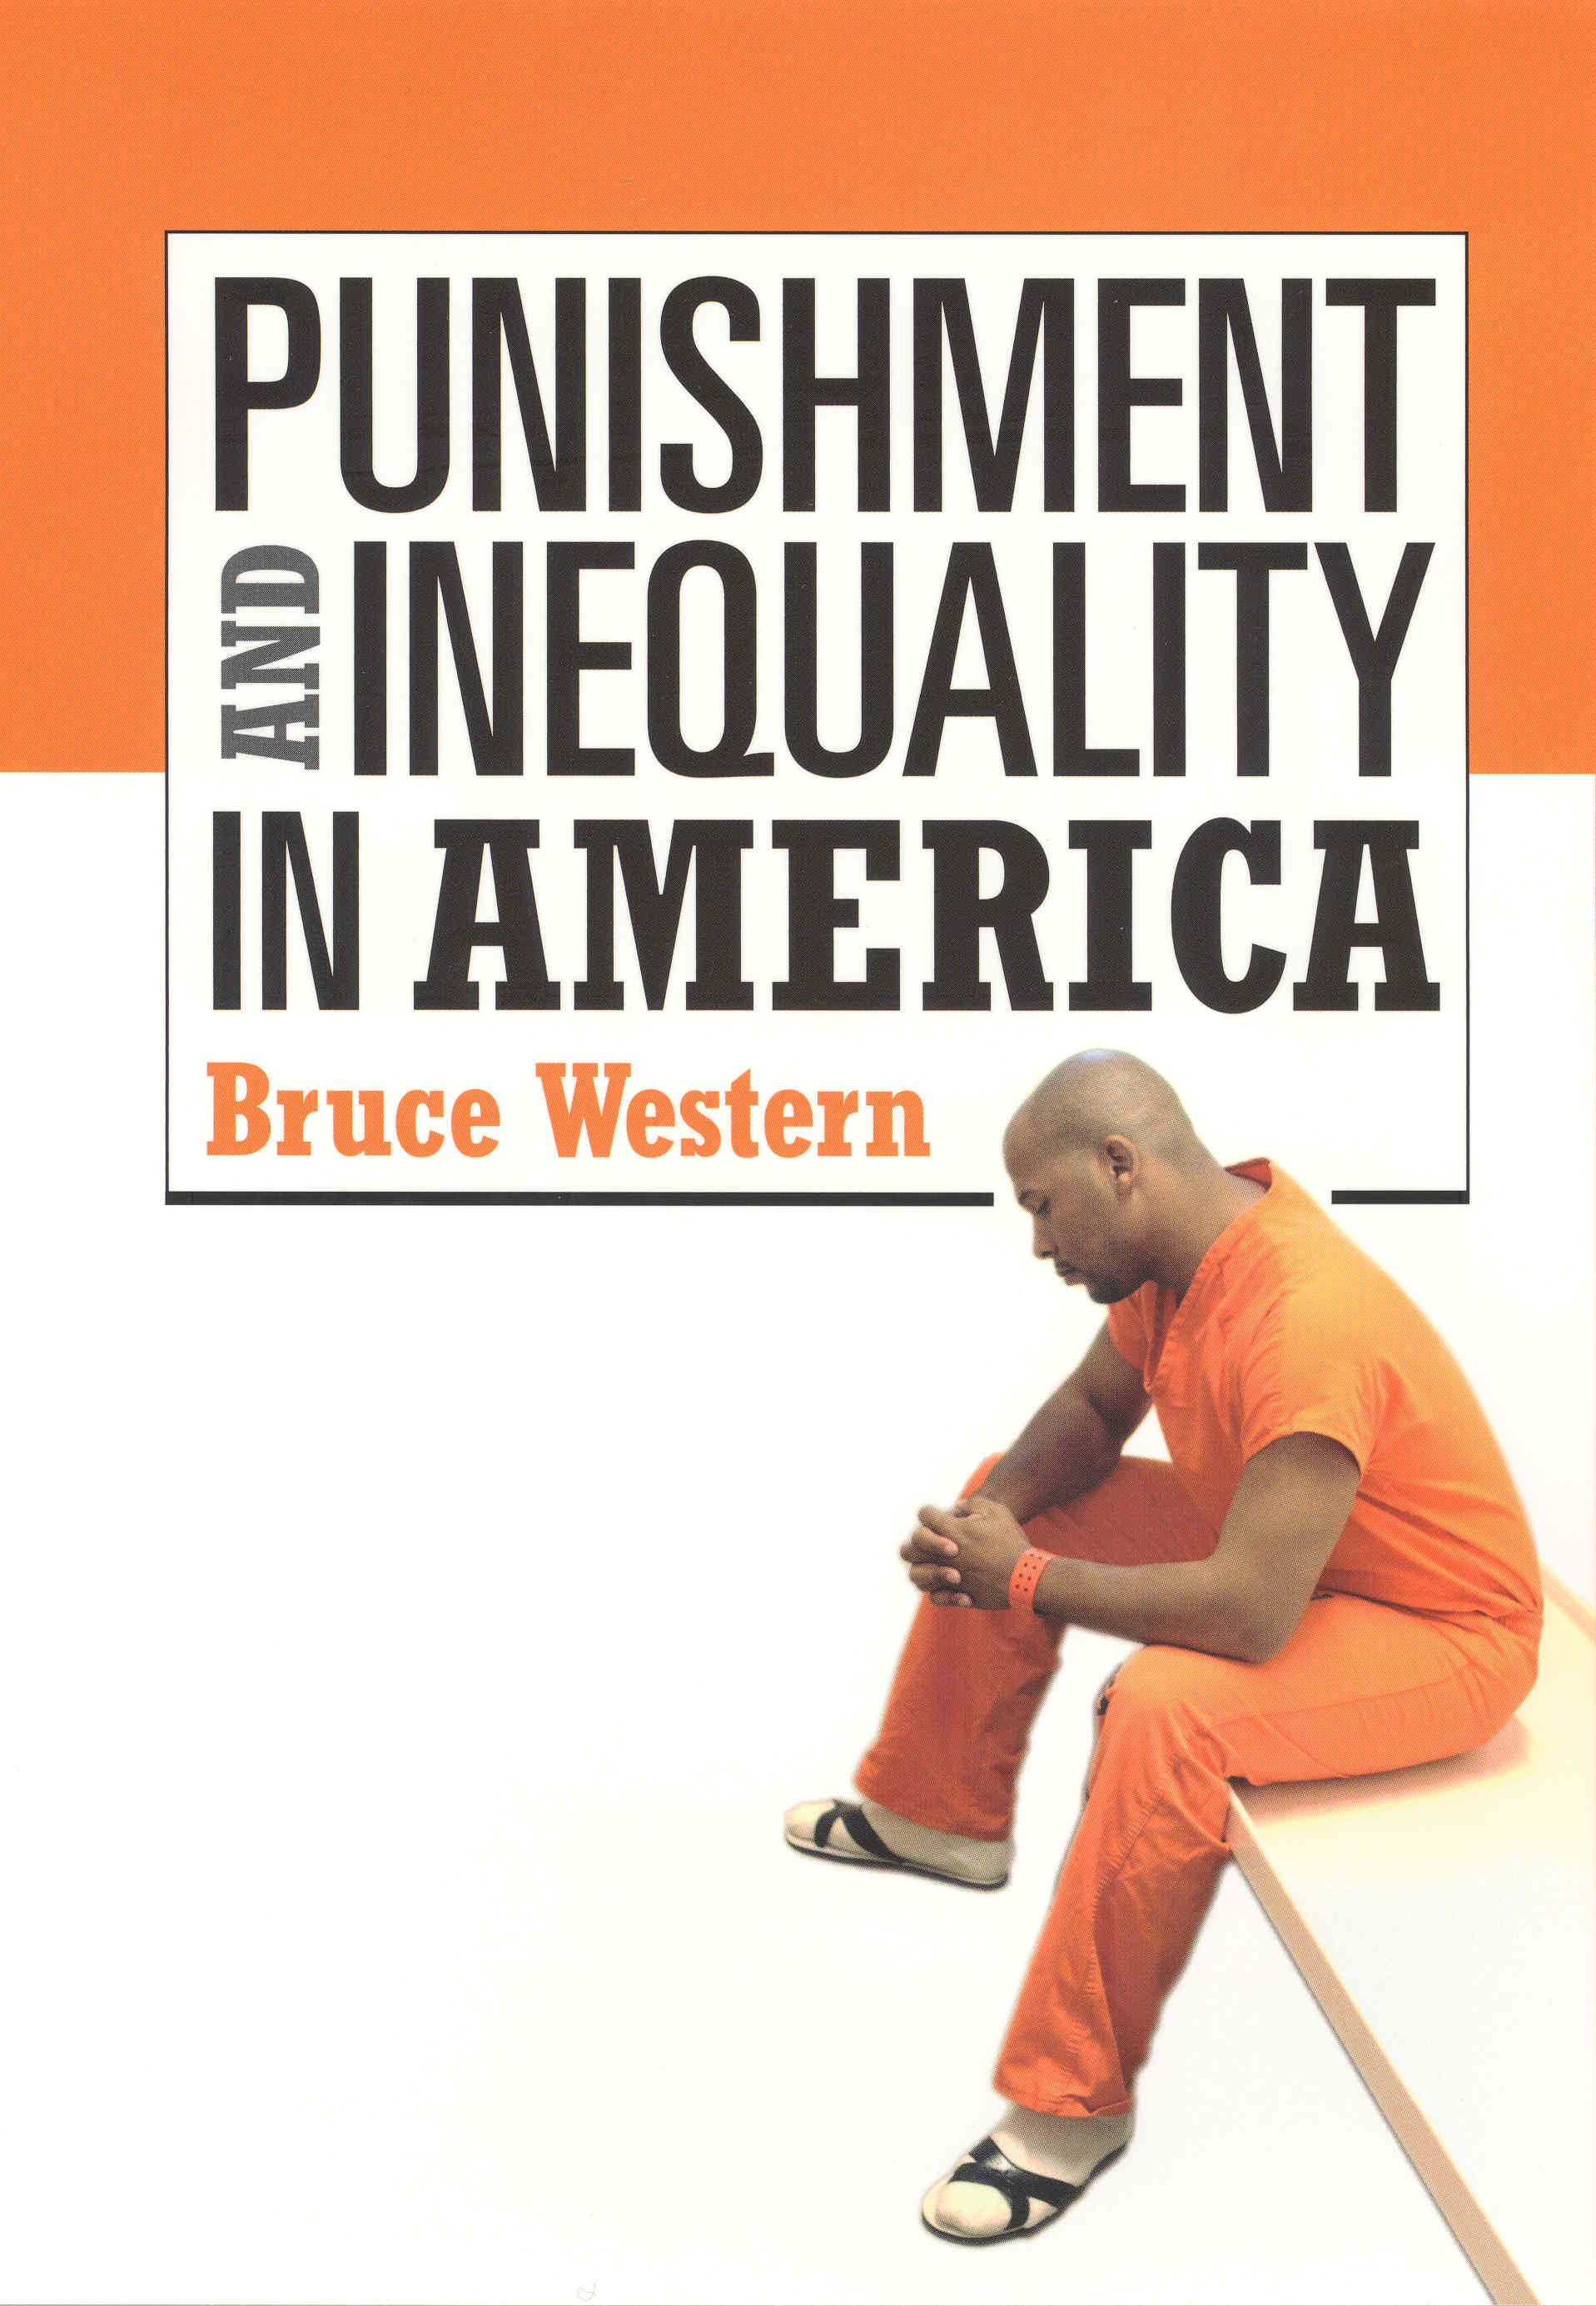 Punishment and Inequality in America